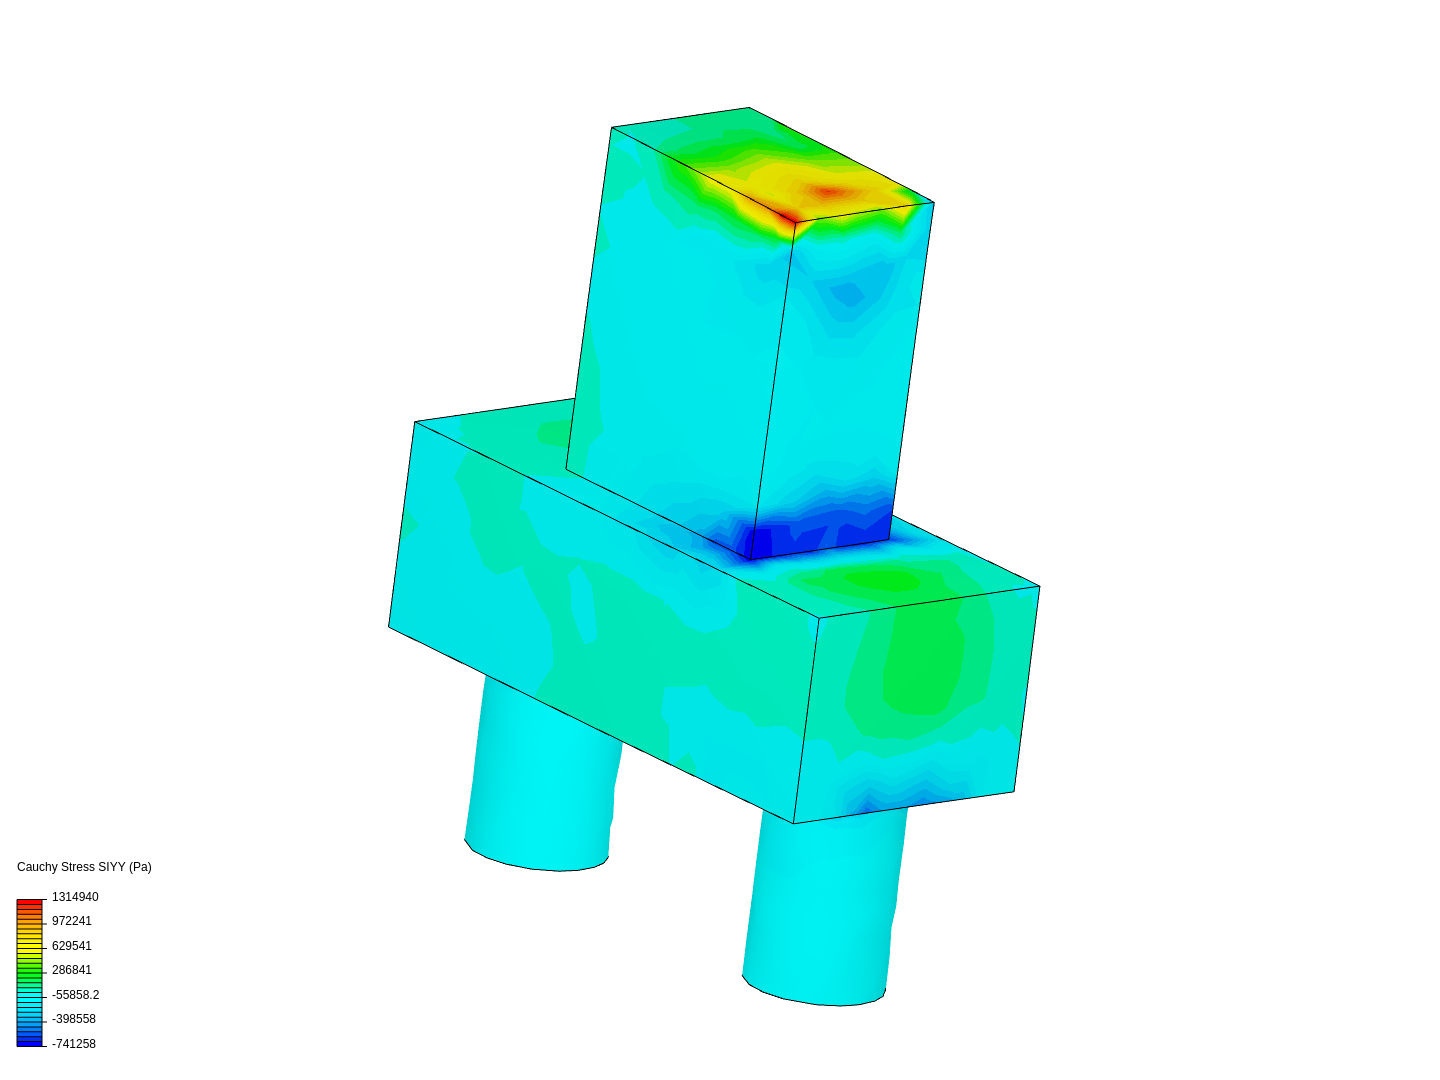 Two Drilled Shaft Shallow Foundation STM image